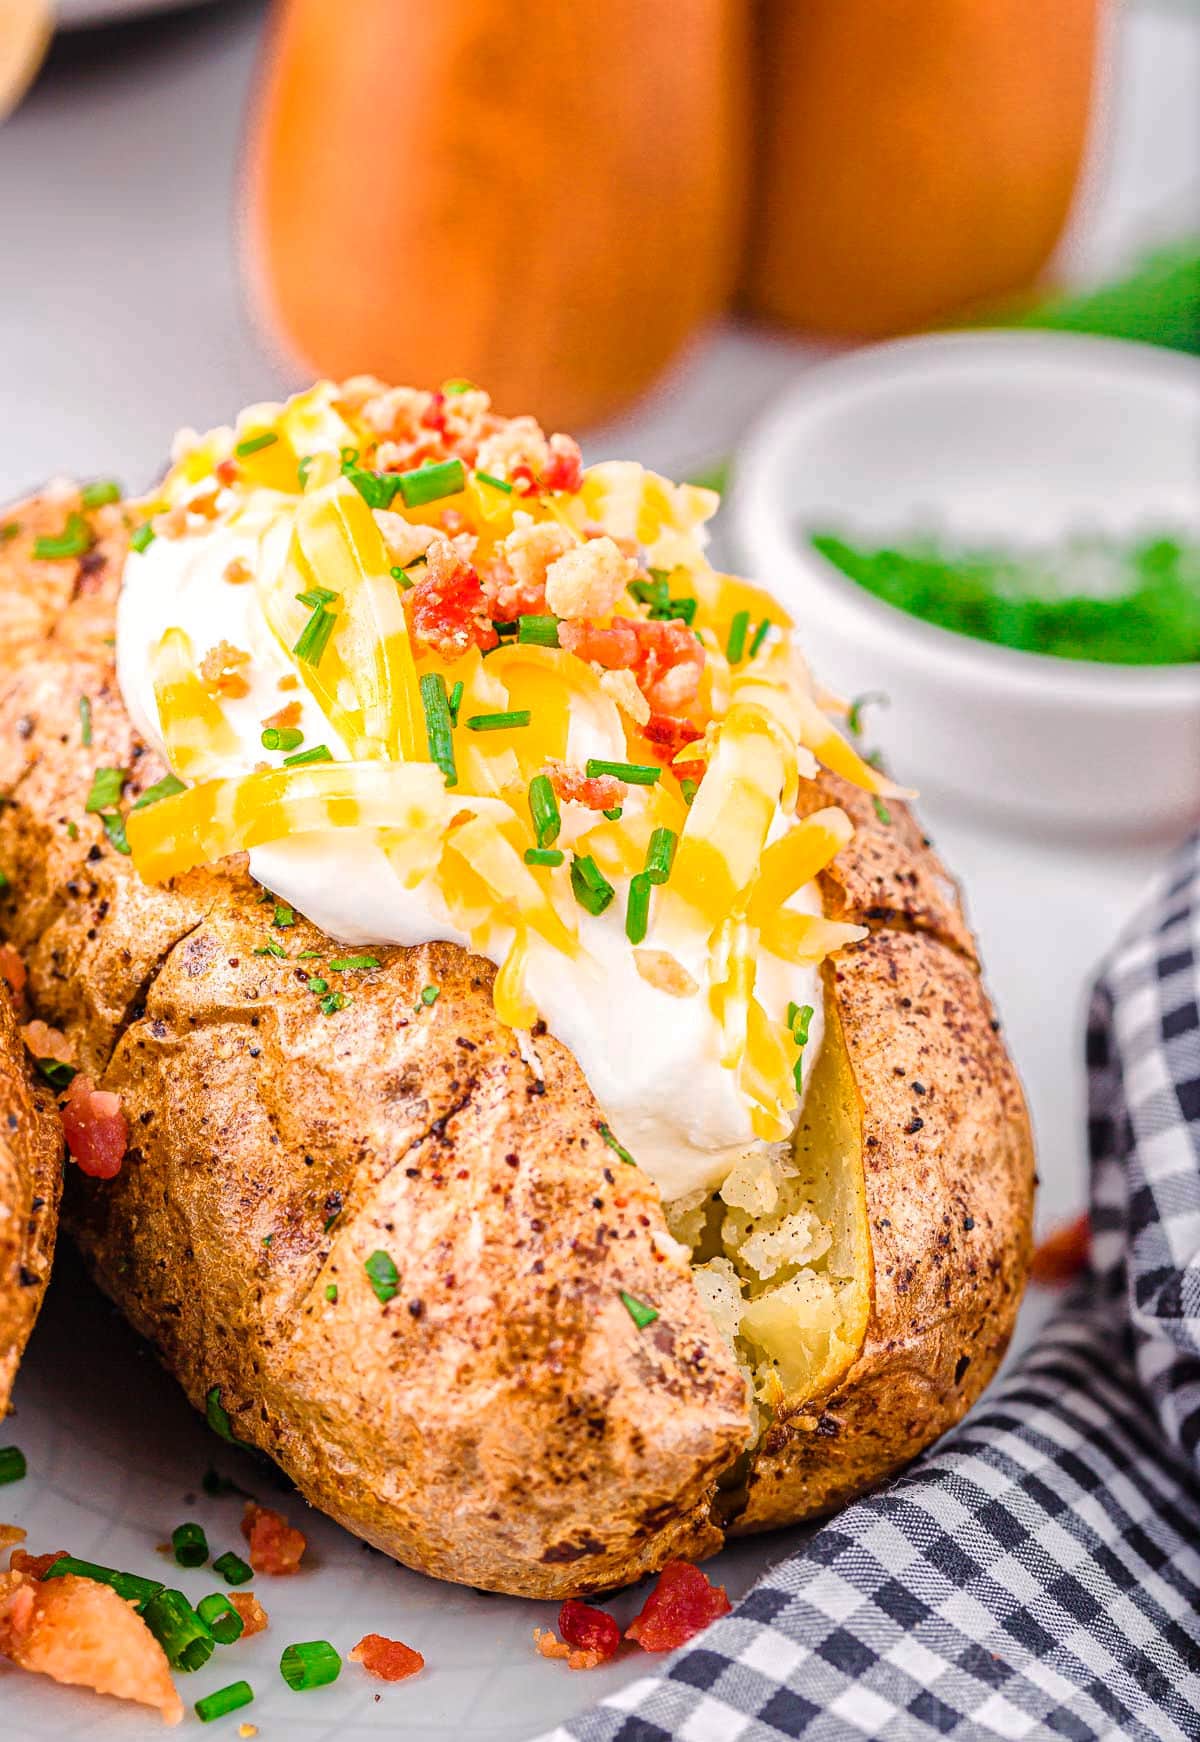 full loaded air fryer baked potato topped with sour cream, cheese, bacon and chives.